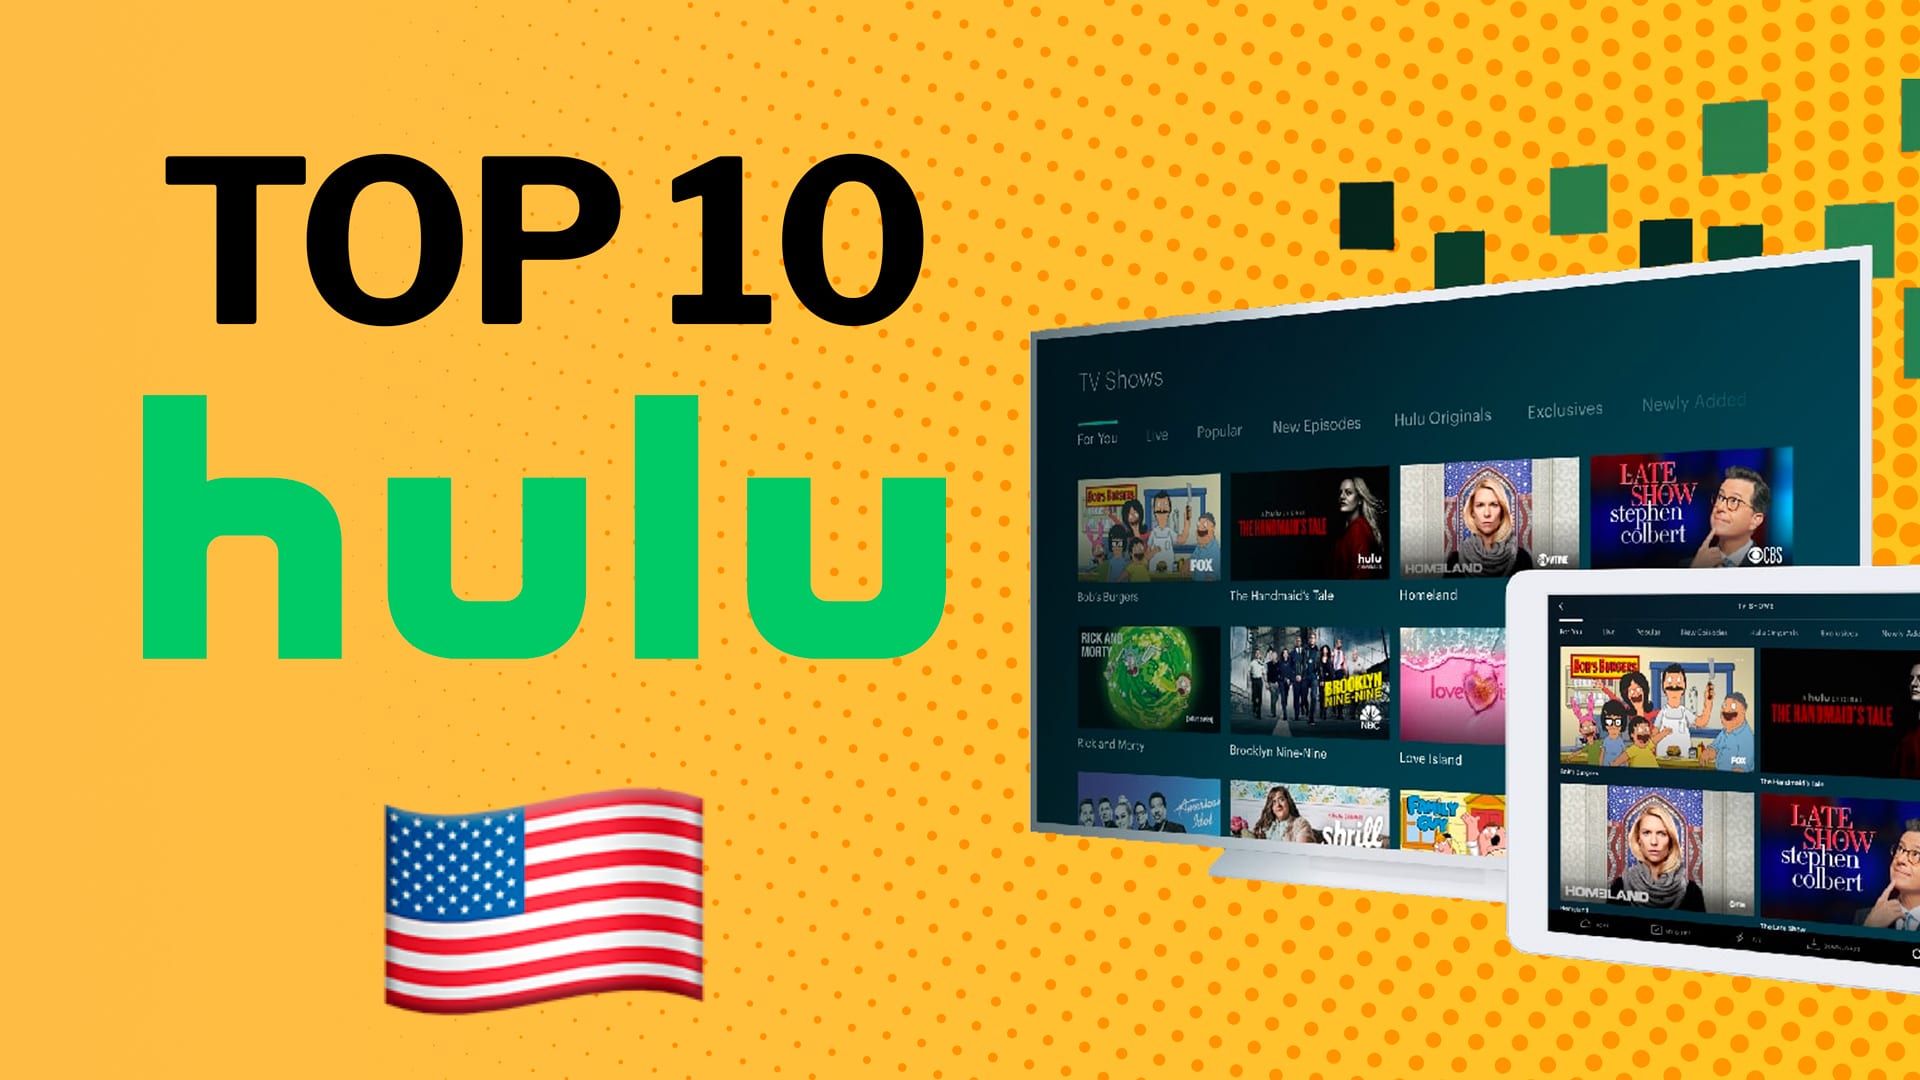 Hulu ranking in the United States: these are the most popular movies of the moment